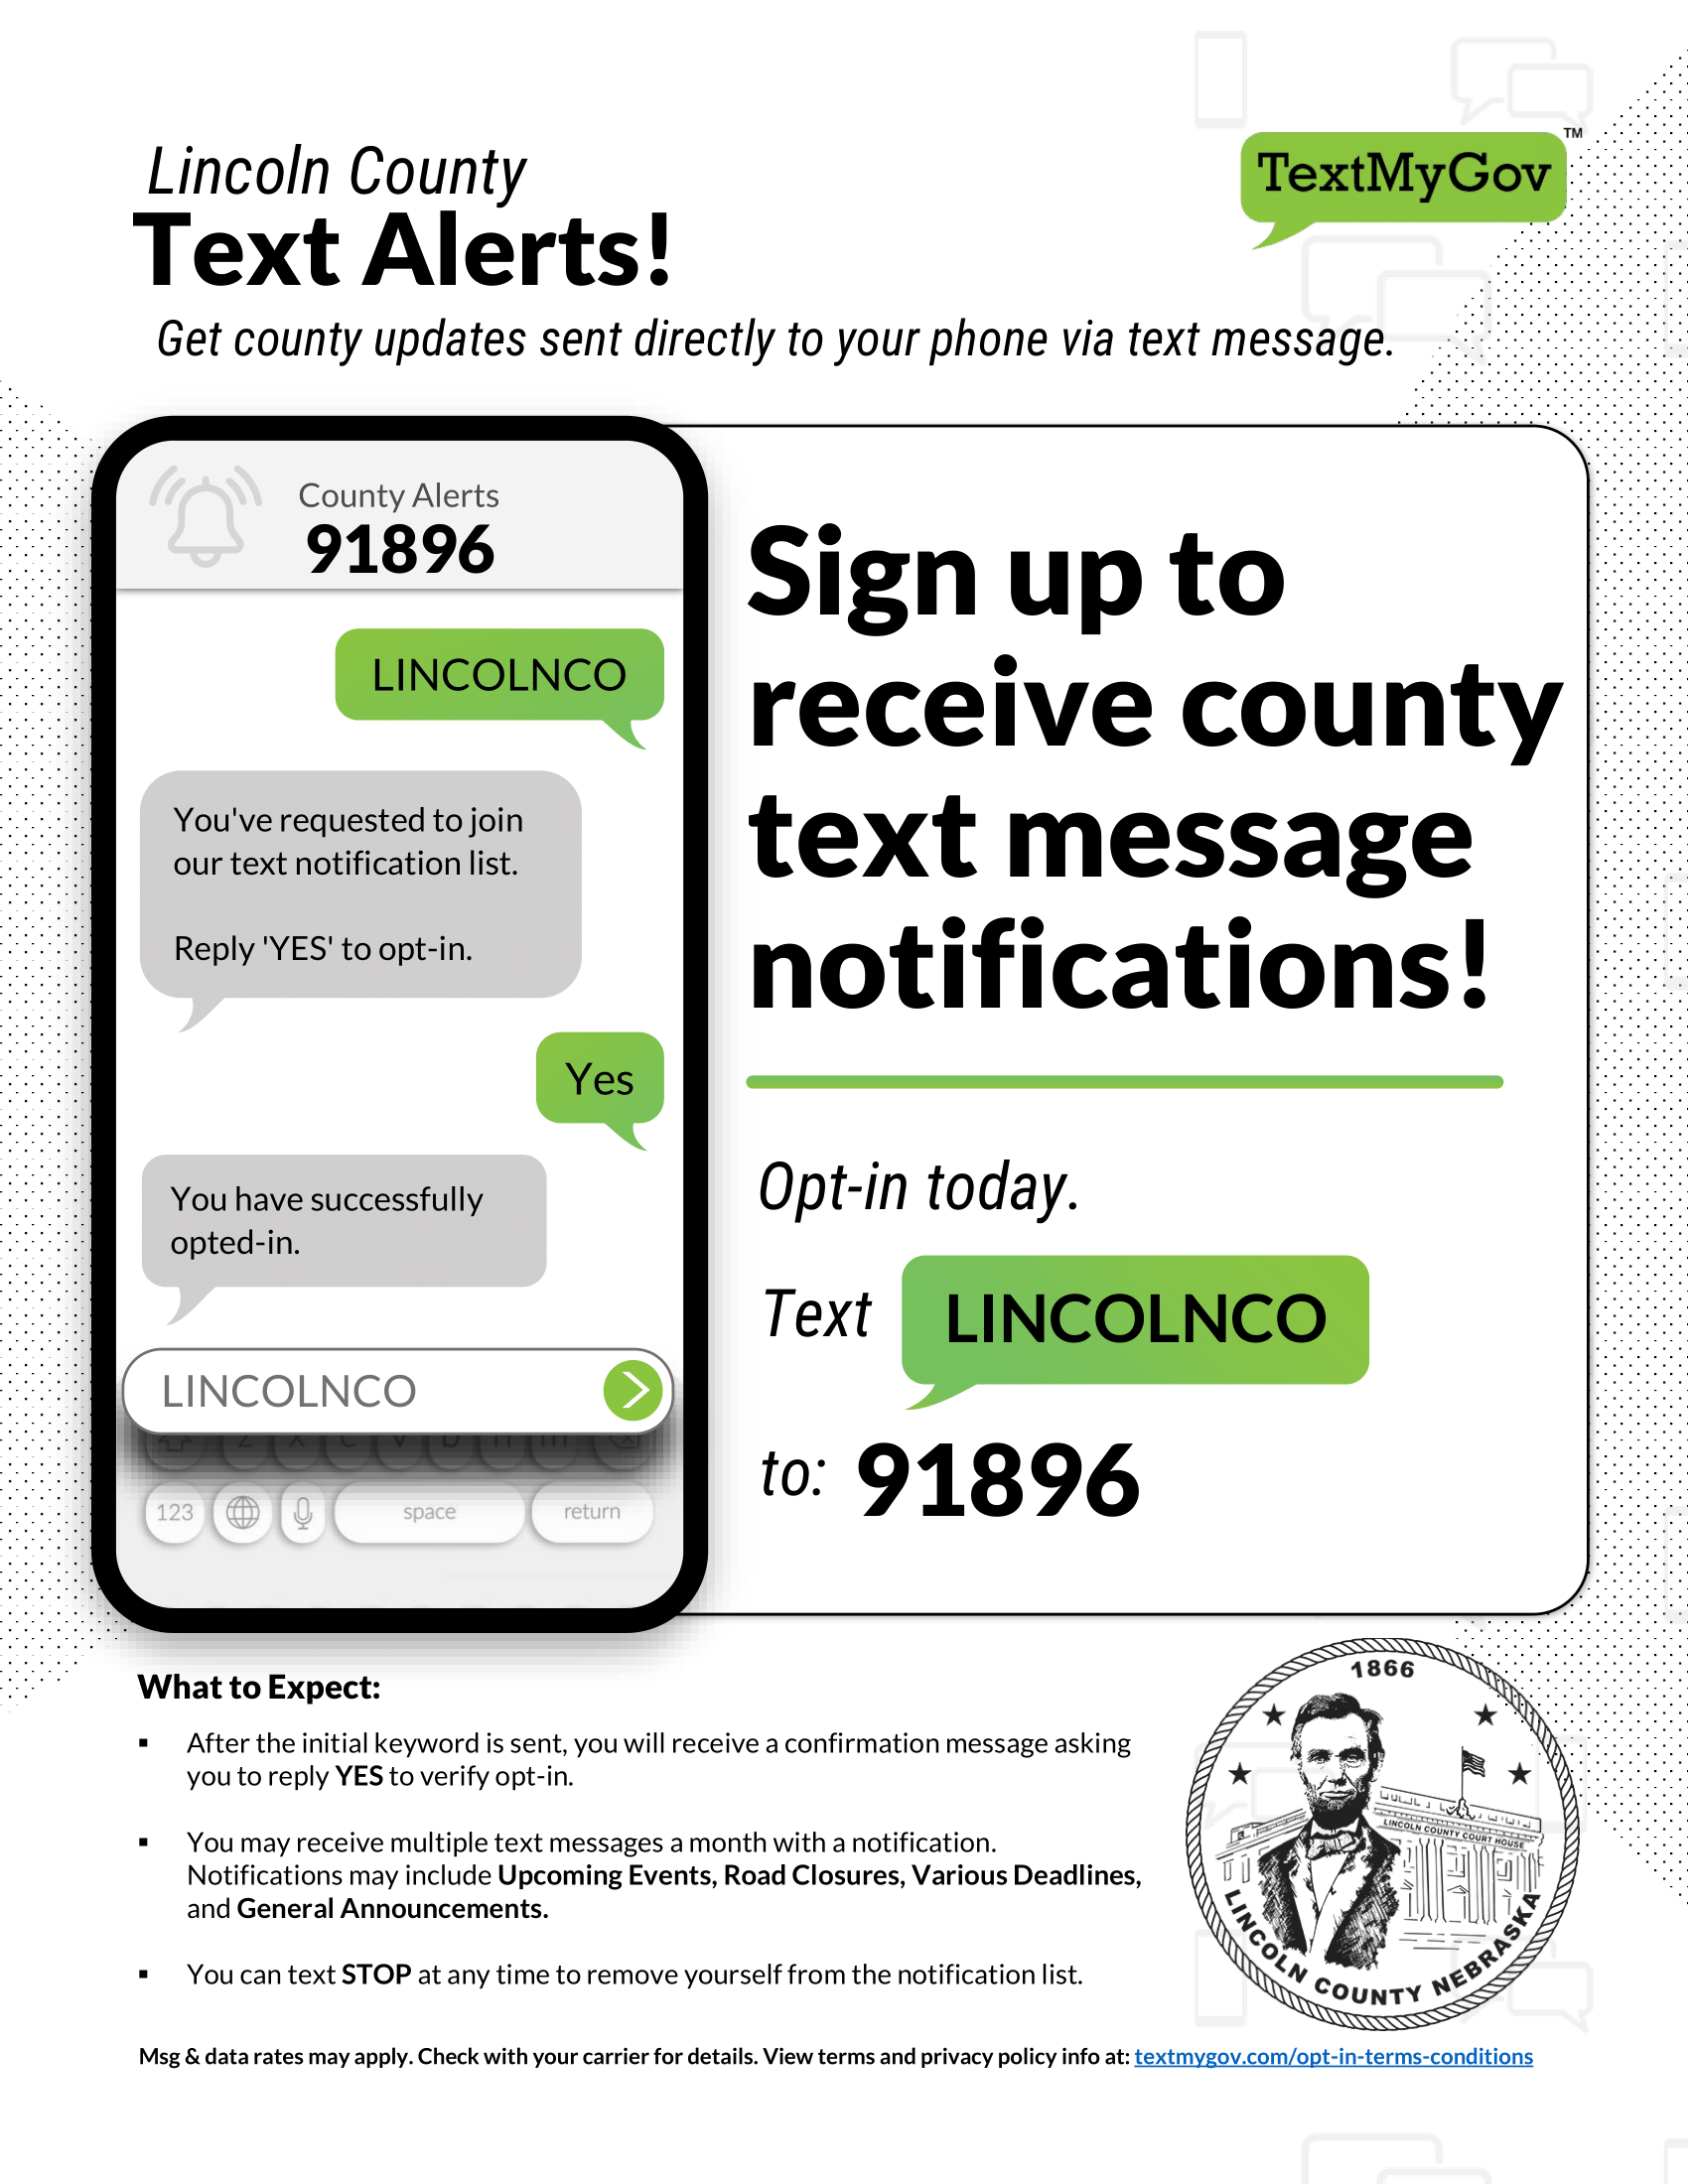 Sigh up to receive County text notifications. Text LINCOLN CO to 91896 to opt in.